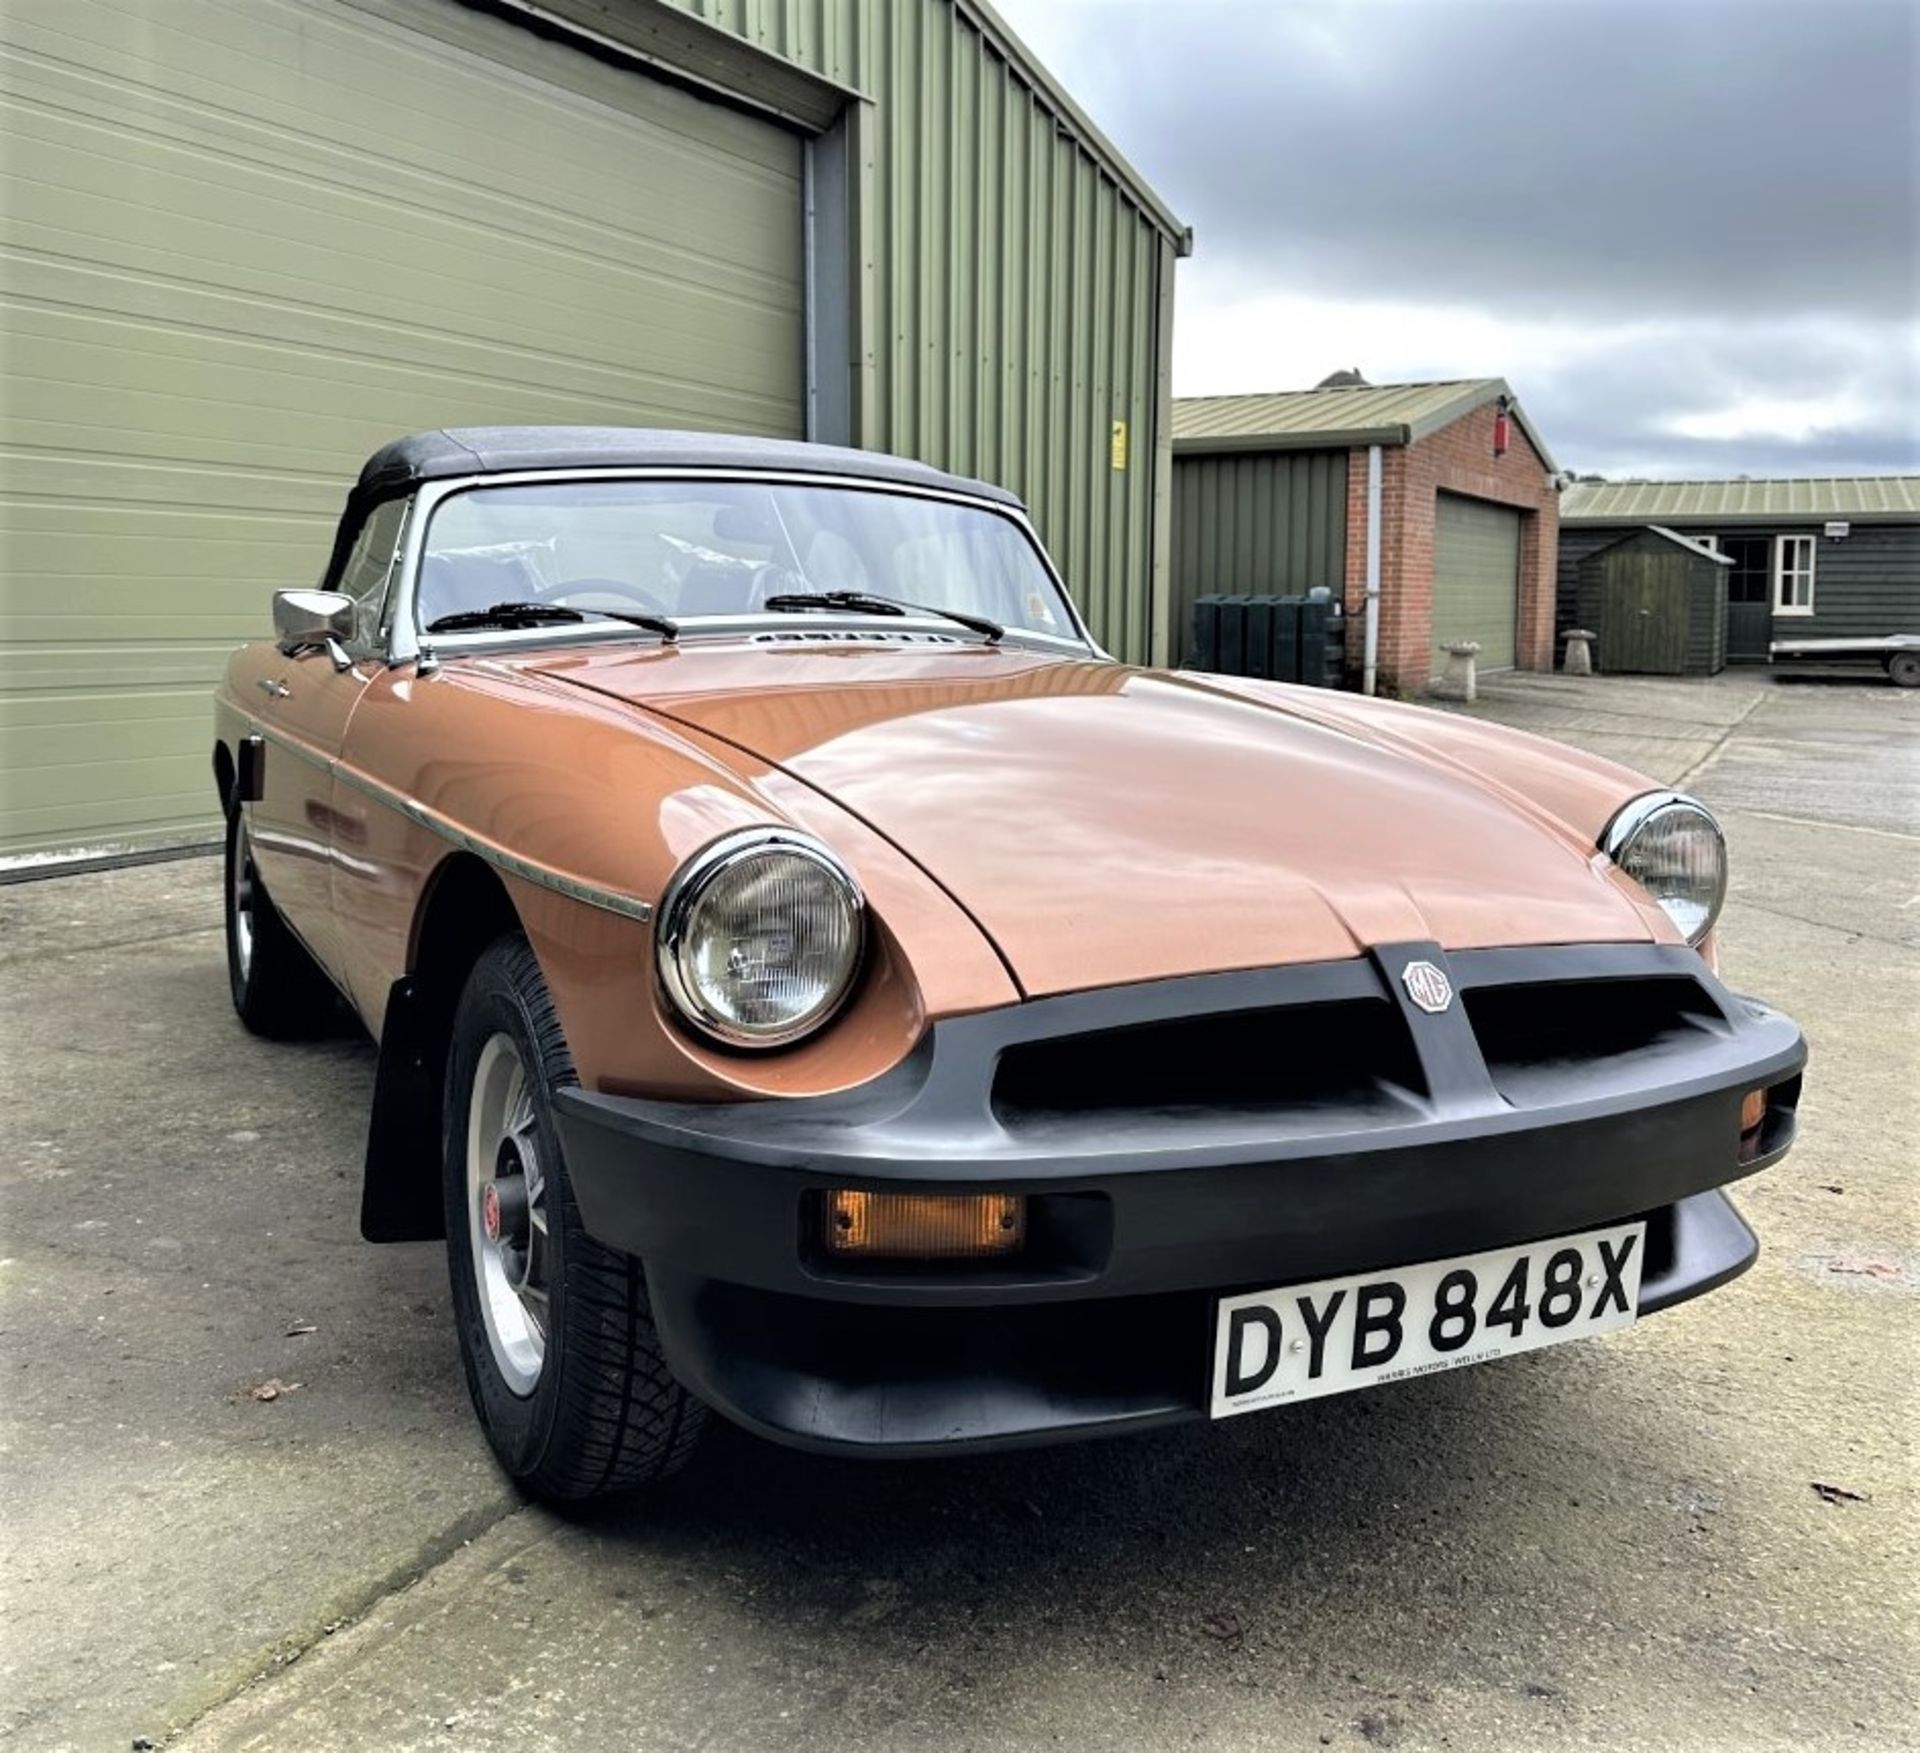 1981 MGB LE ROADSTER - offered at No Reserve Registration Number: DYB 848X Chassis Number: - Image 4 of 16